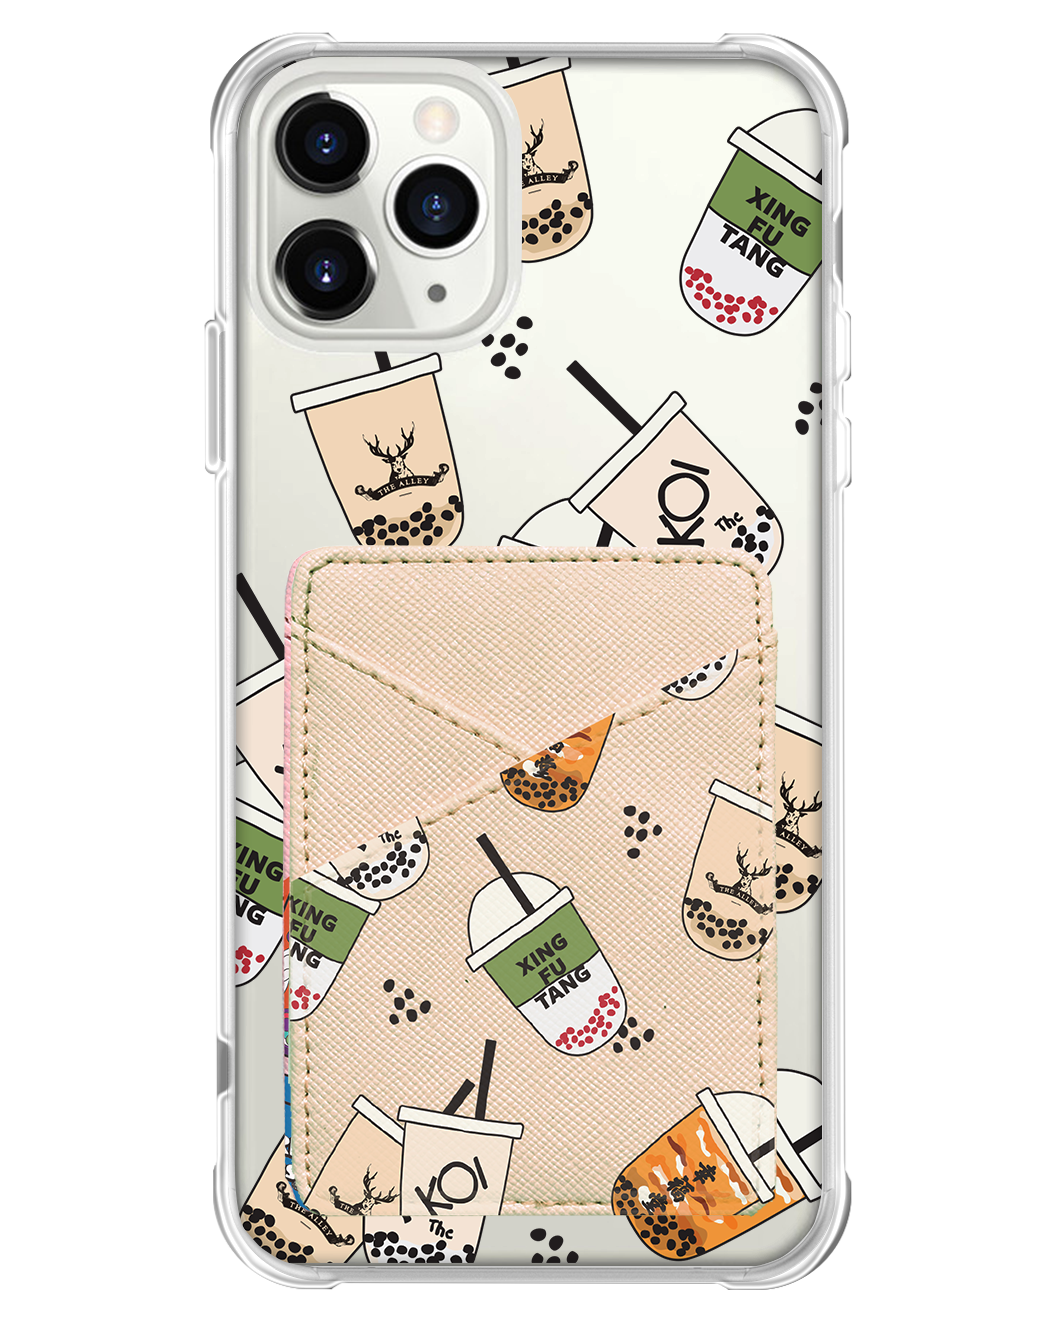 iPhone Phone Wallet Case - Boba